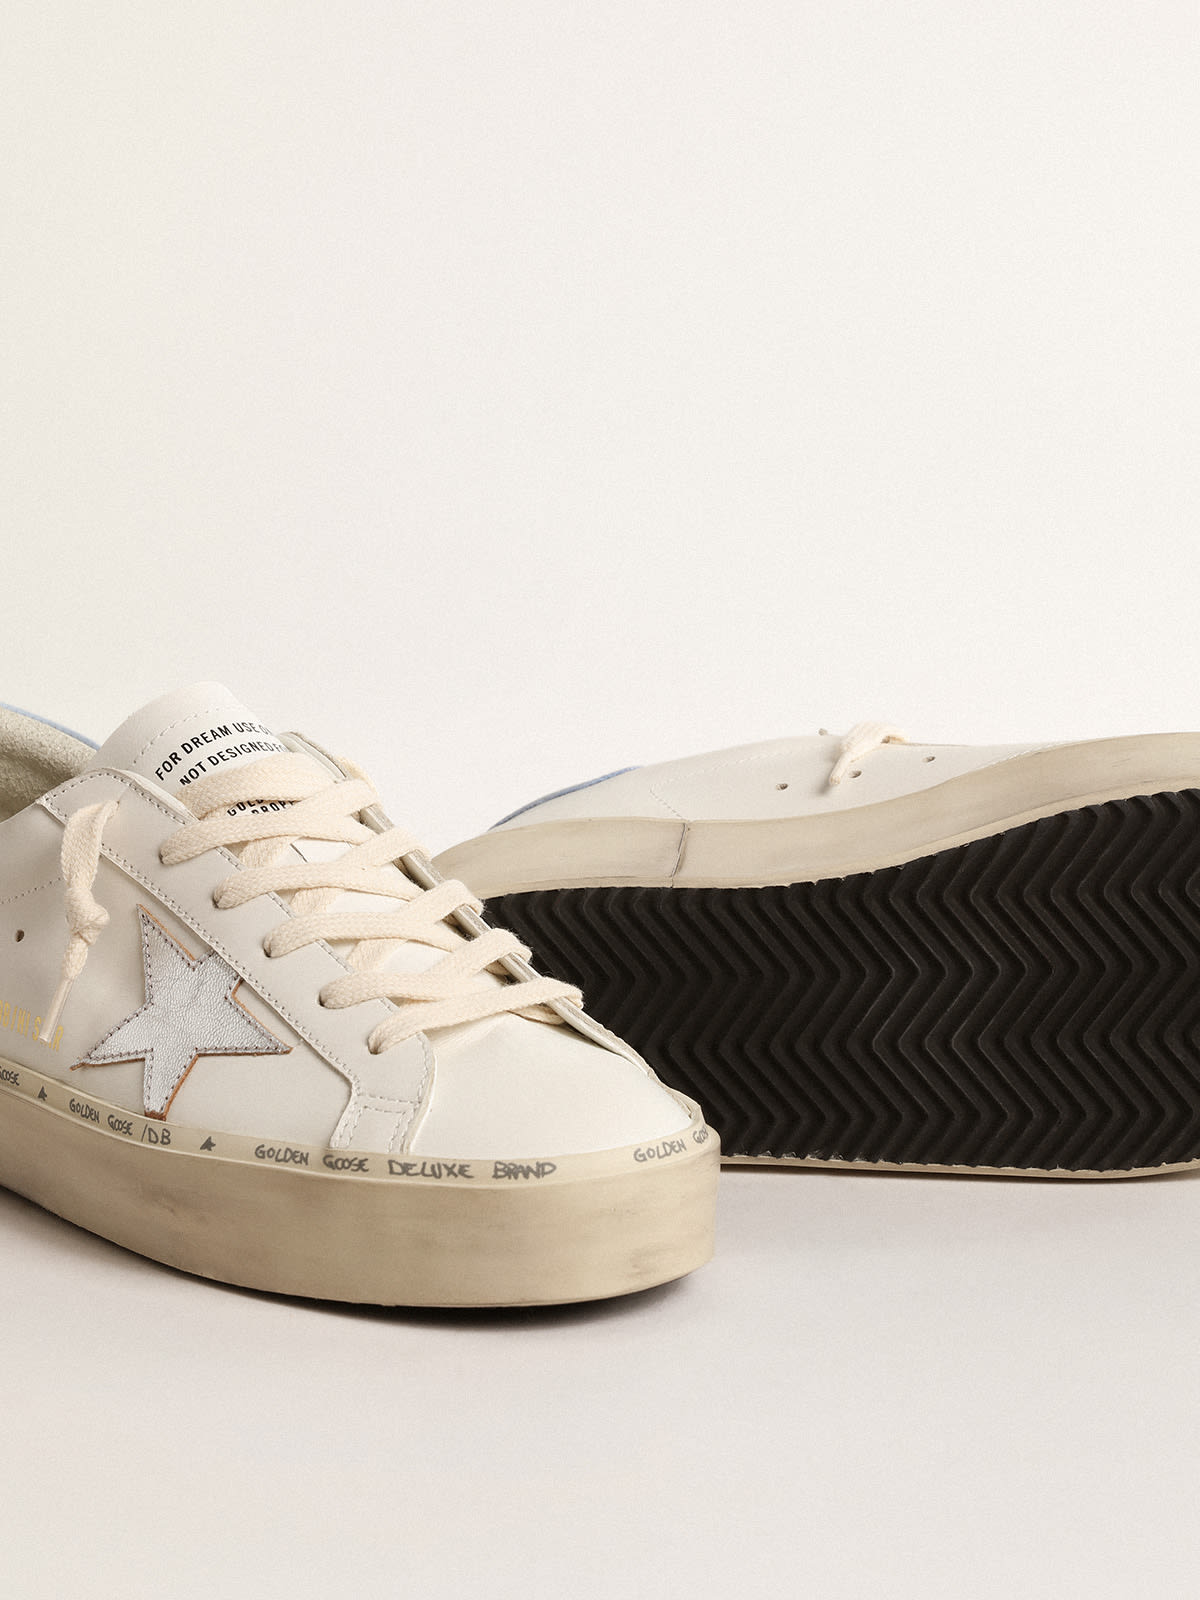 Golden Goose - Hi Star with metallic leather star and powder-blue heel tab in 